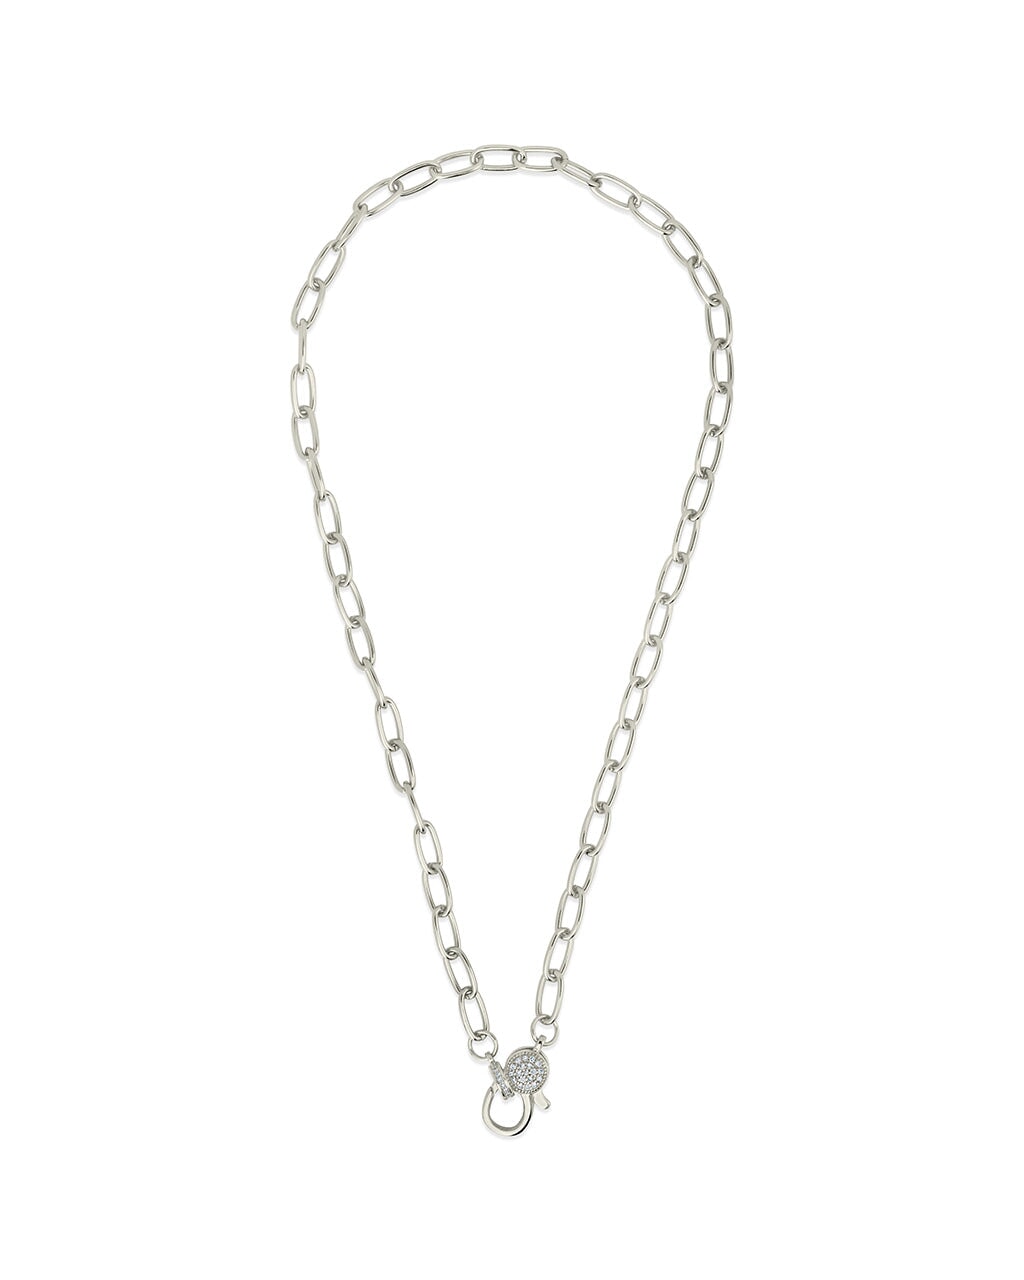 Tay Moonstone Charm & Chain Necklace Necklace Sterling Forever 